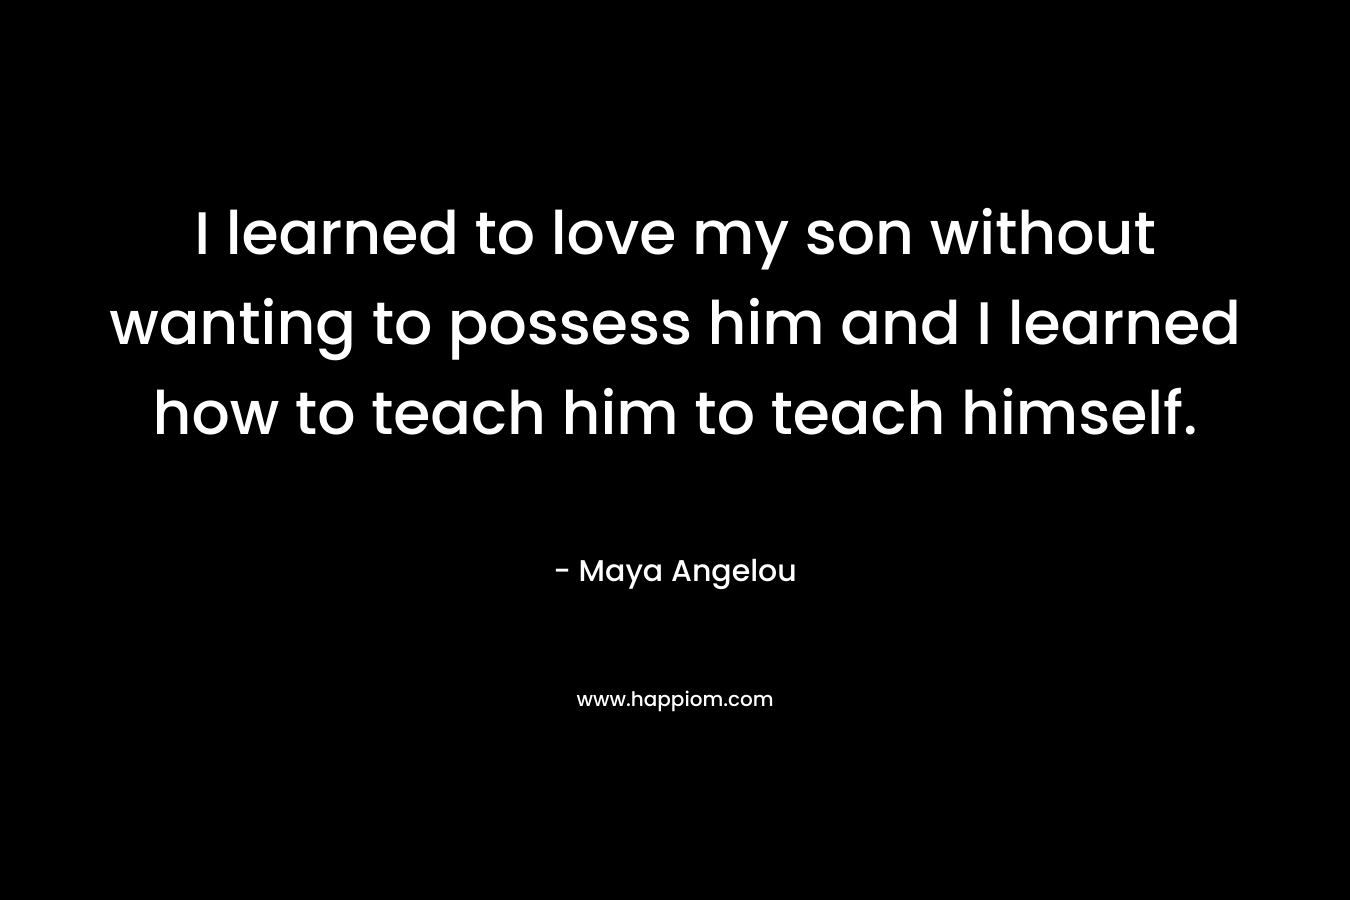 I learned to love my son without wanting to possess him and I learned how to teach him to teach himself.